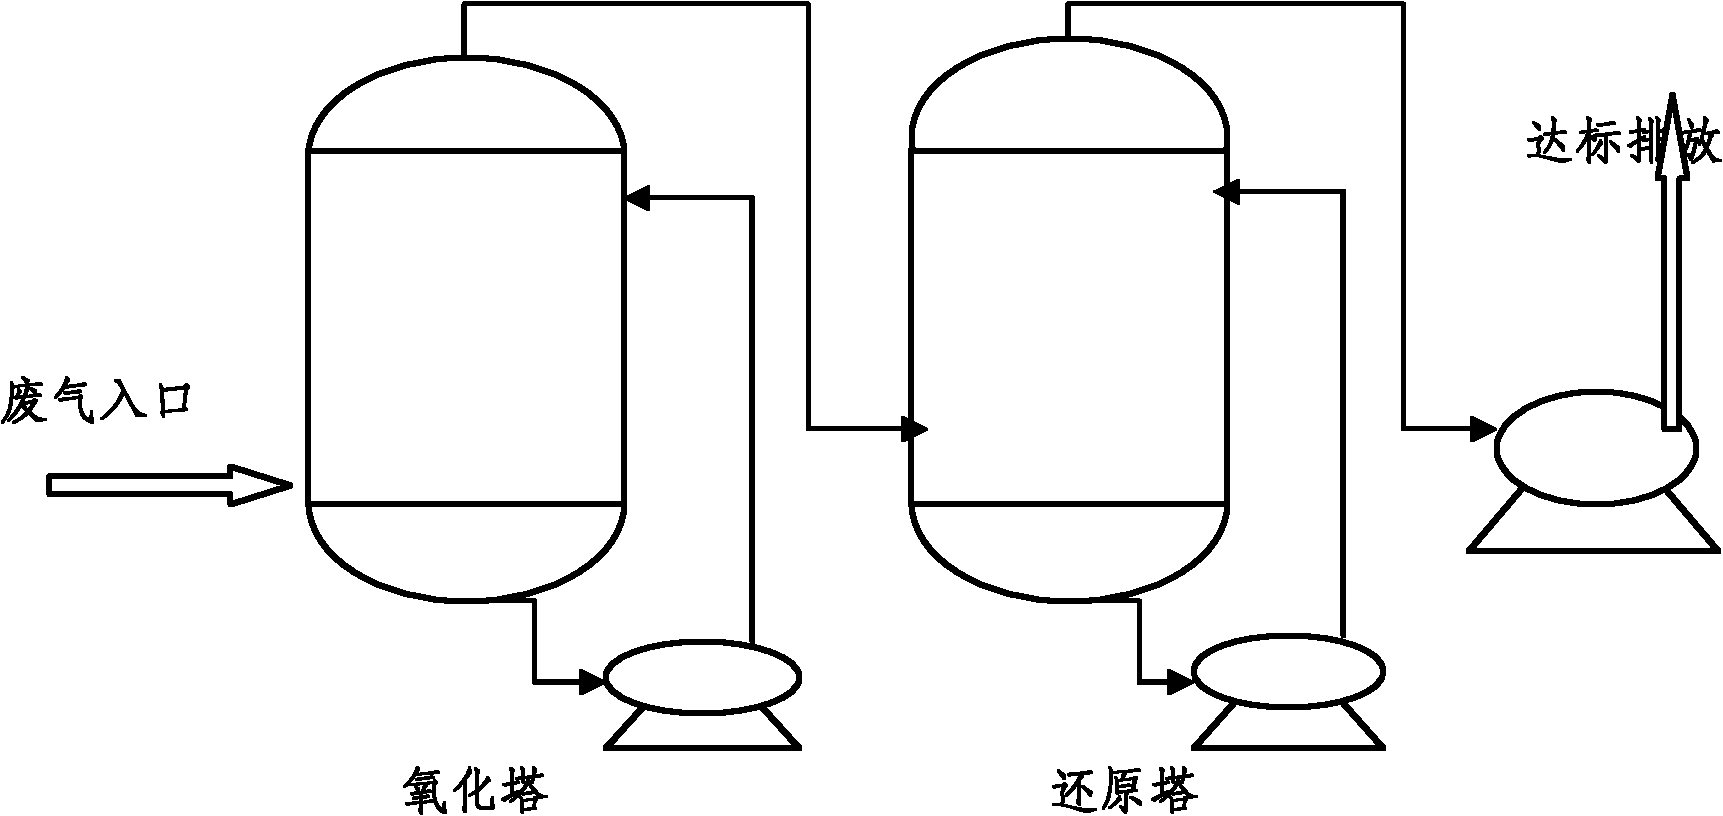 Purification process for acid oxidation and alkaline reduction of waste gas containing nitrogen oxide